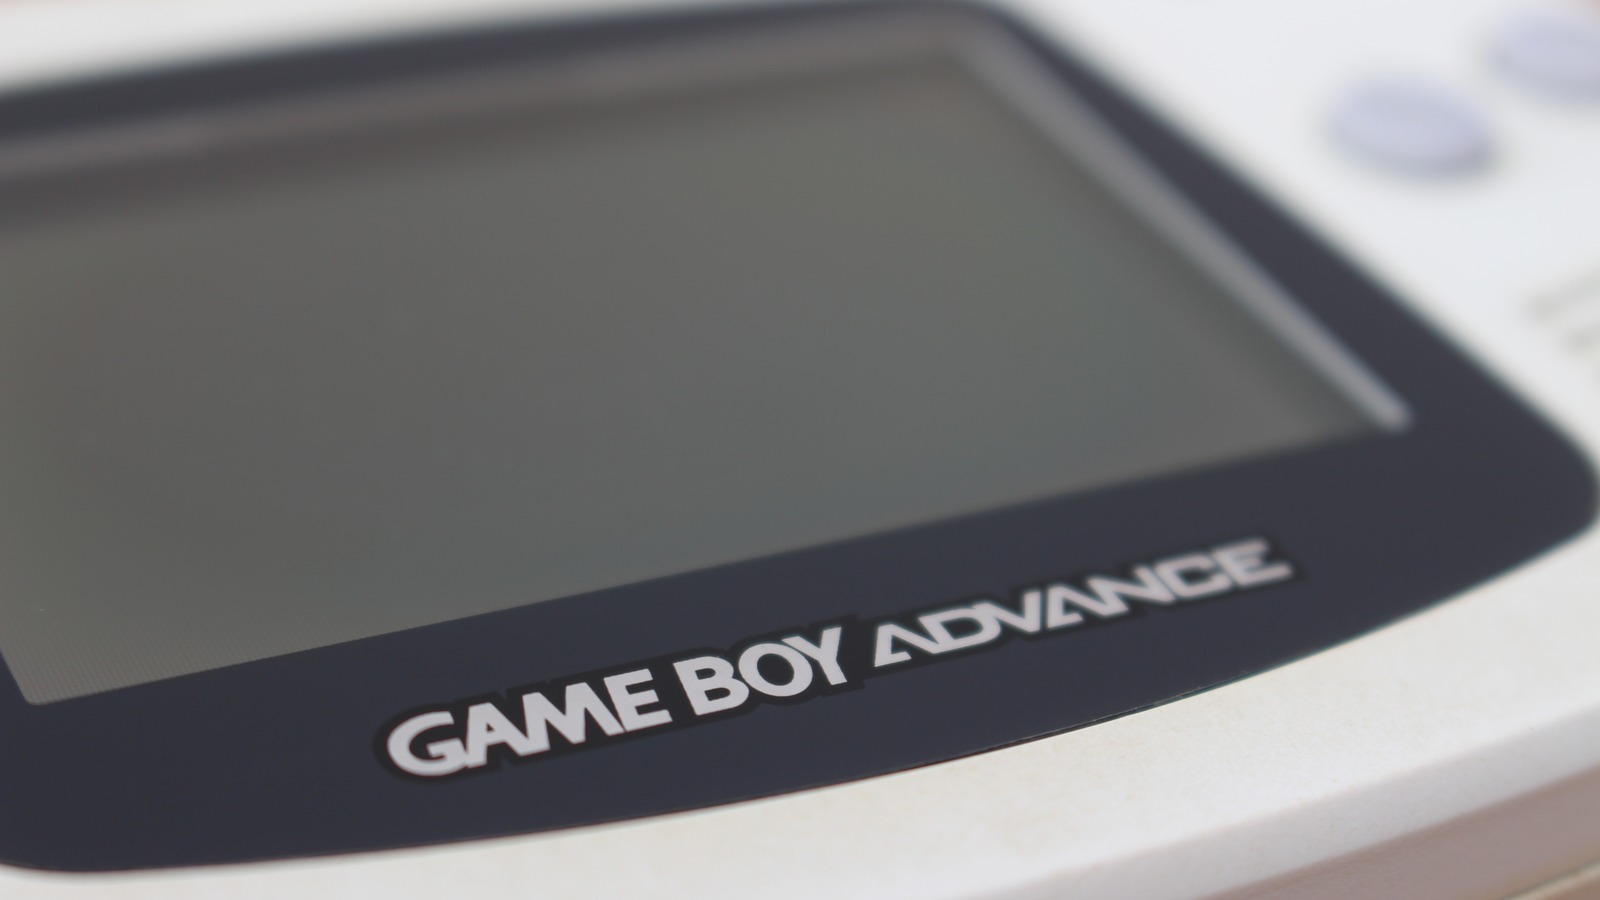 GBA Games reportedly arriving on Nintendo Switch Online service